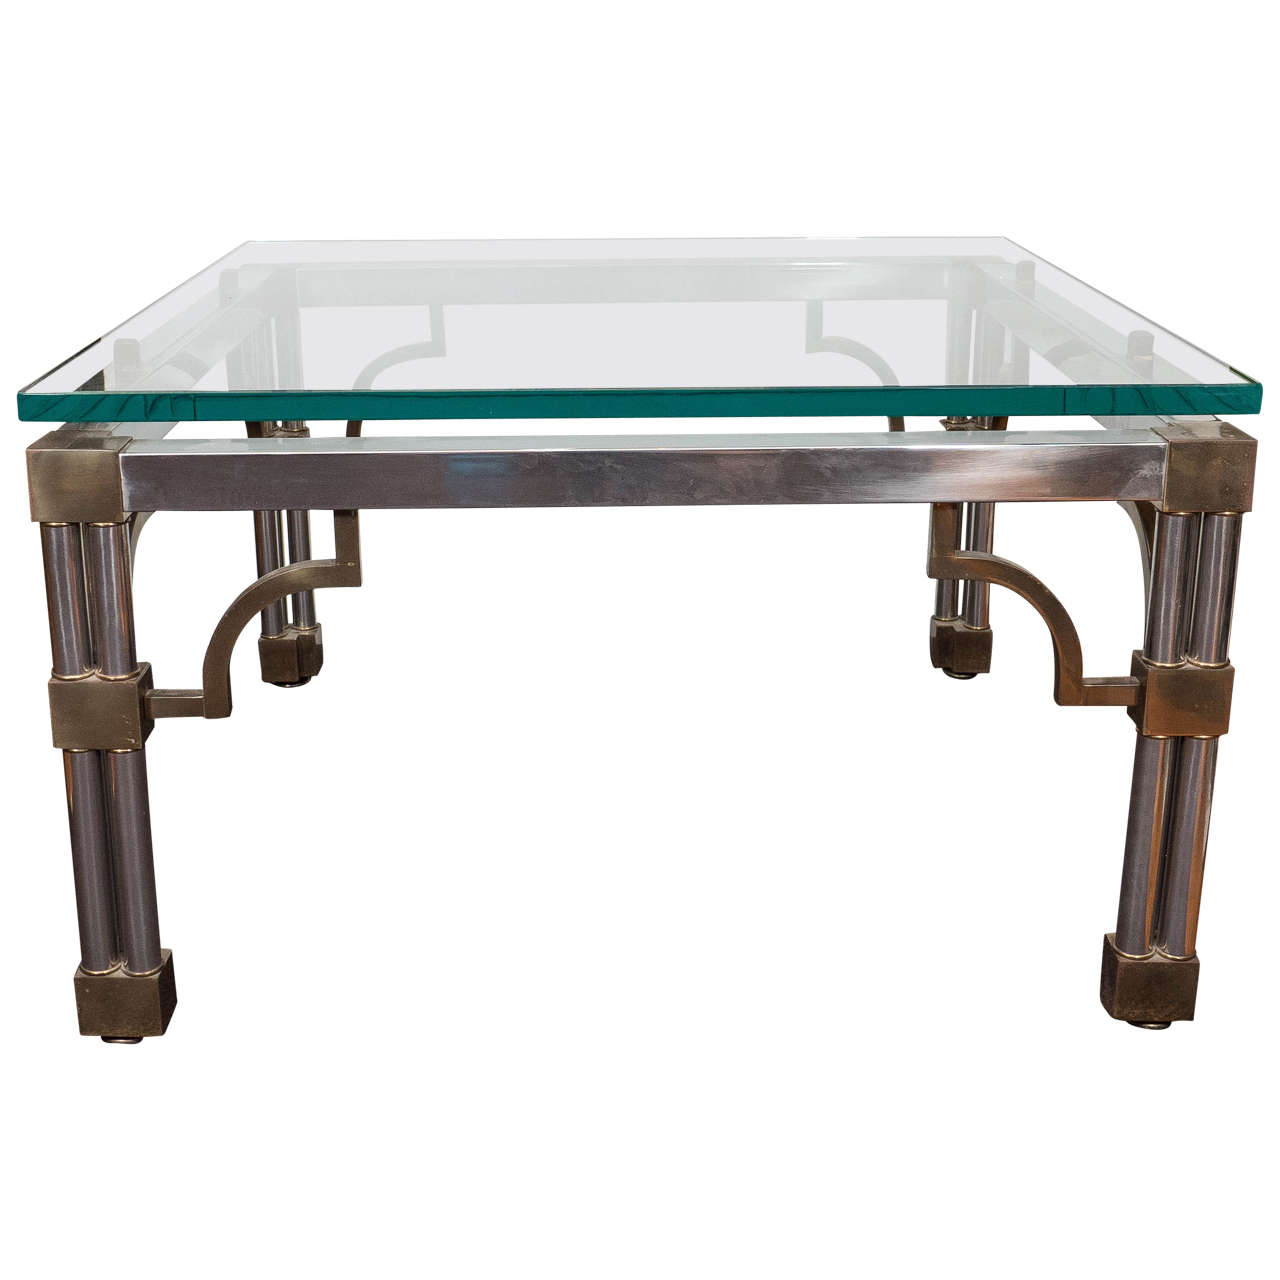 Asian Inspired Glass Top Chrome Coffee Table with Brass Detail